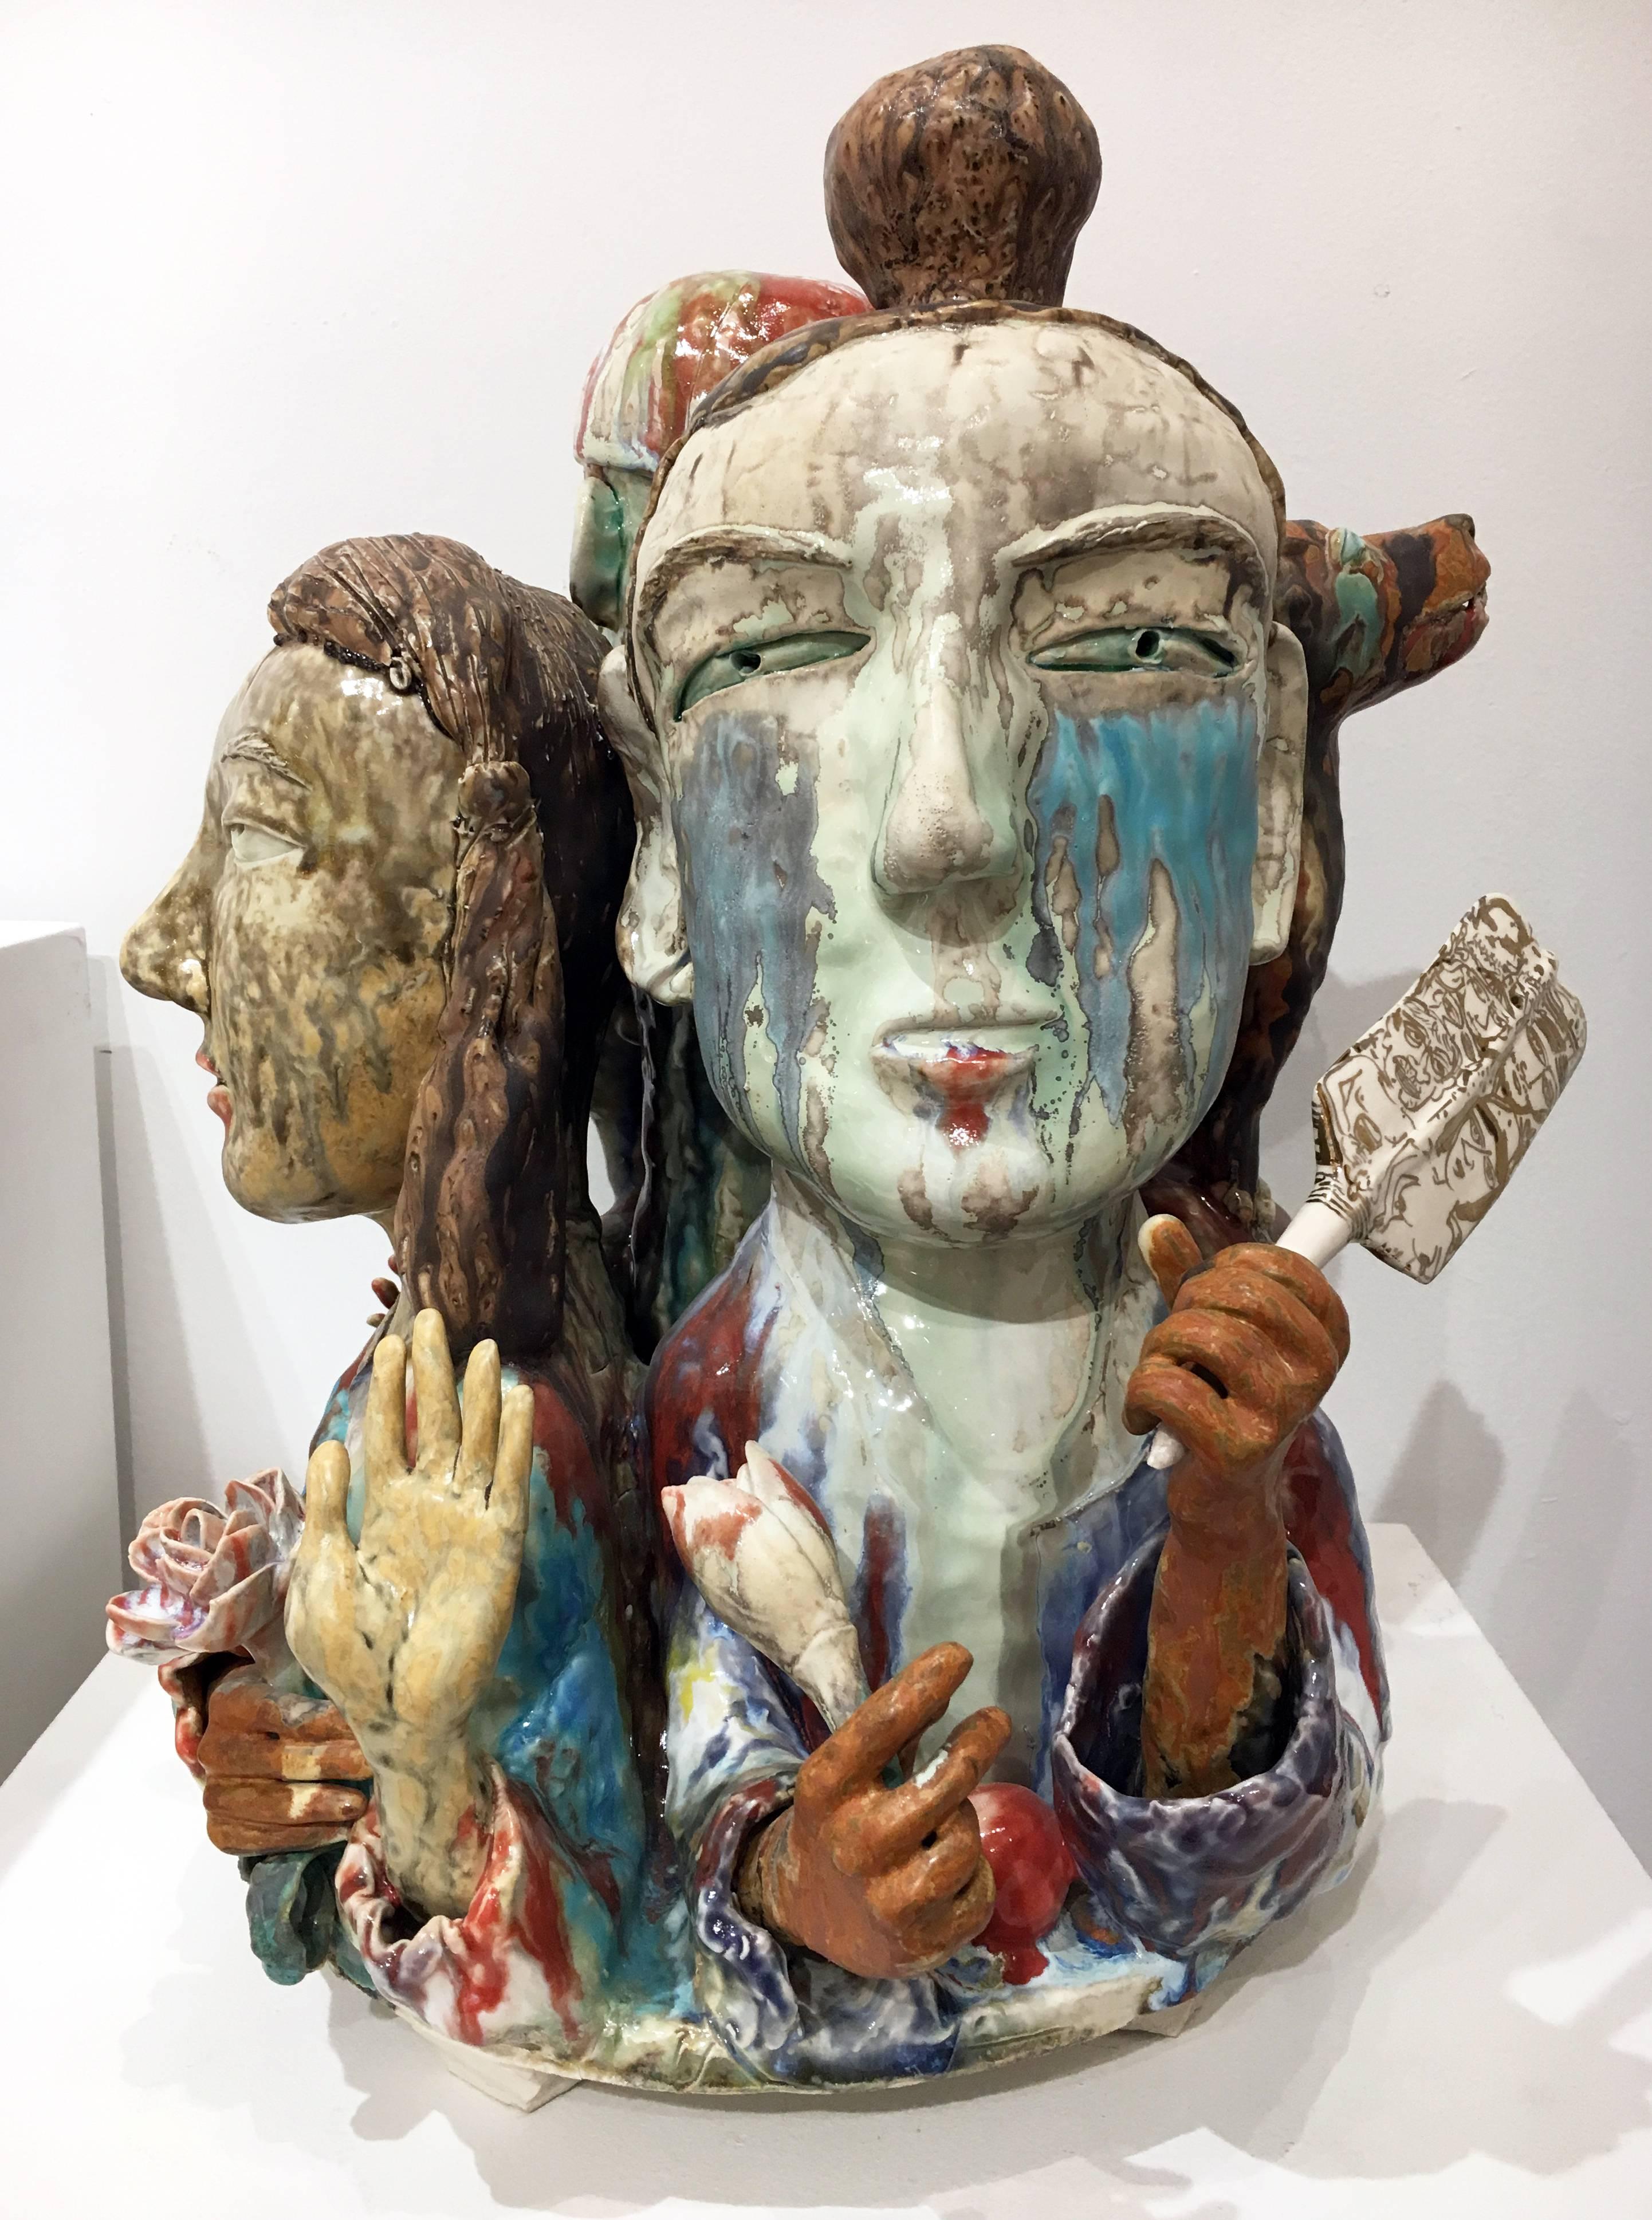 "Another Connection", Abstract Figurative Ceramic Sculpture with Colorful Glaze